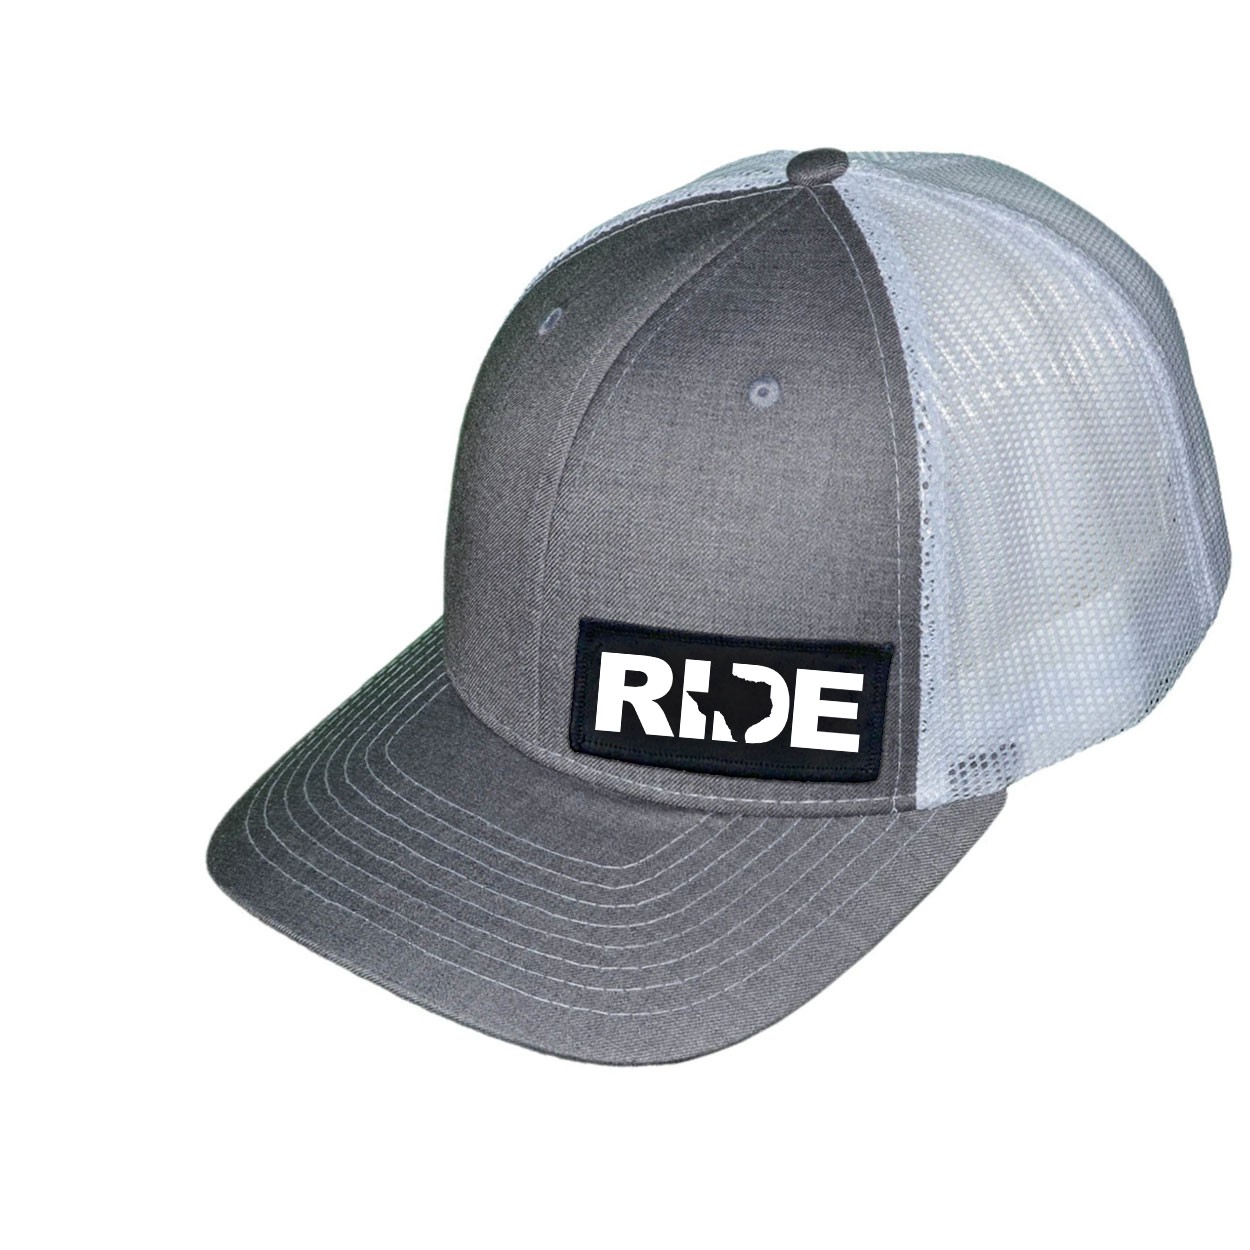 Ride Texas Night Out Woven Patch Snapback Trucker Hat Heather Gray/White (White Logo)